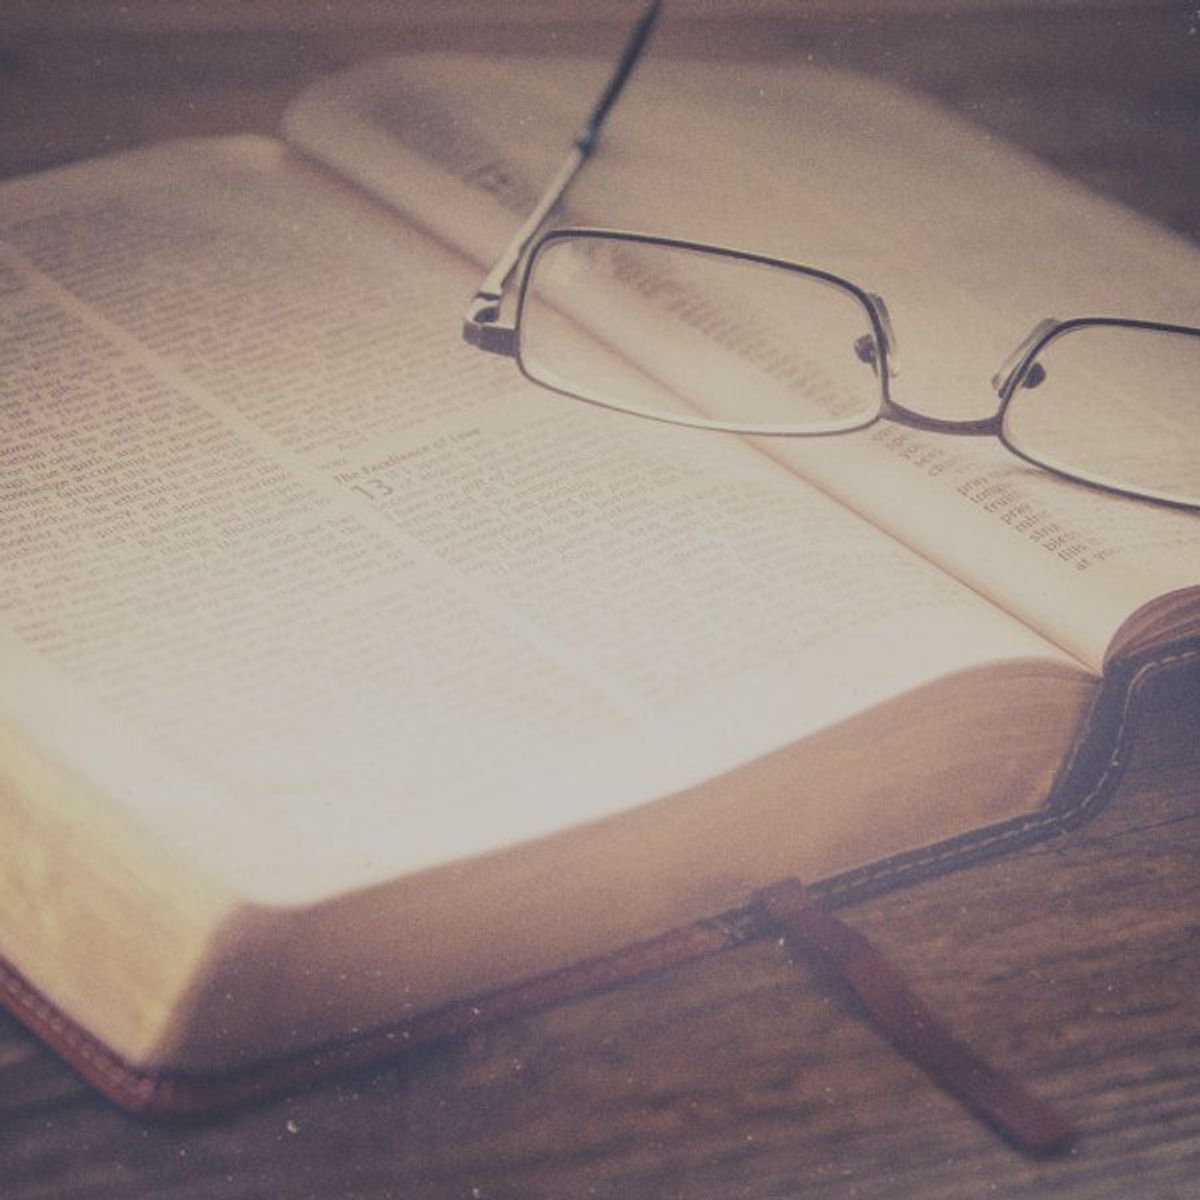 4 Inspirational Bible Quotes To Ease Your Soul